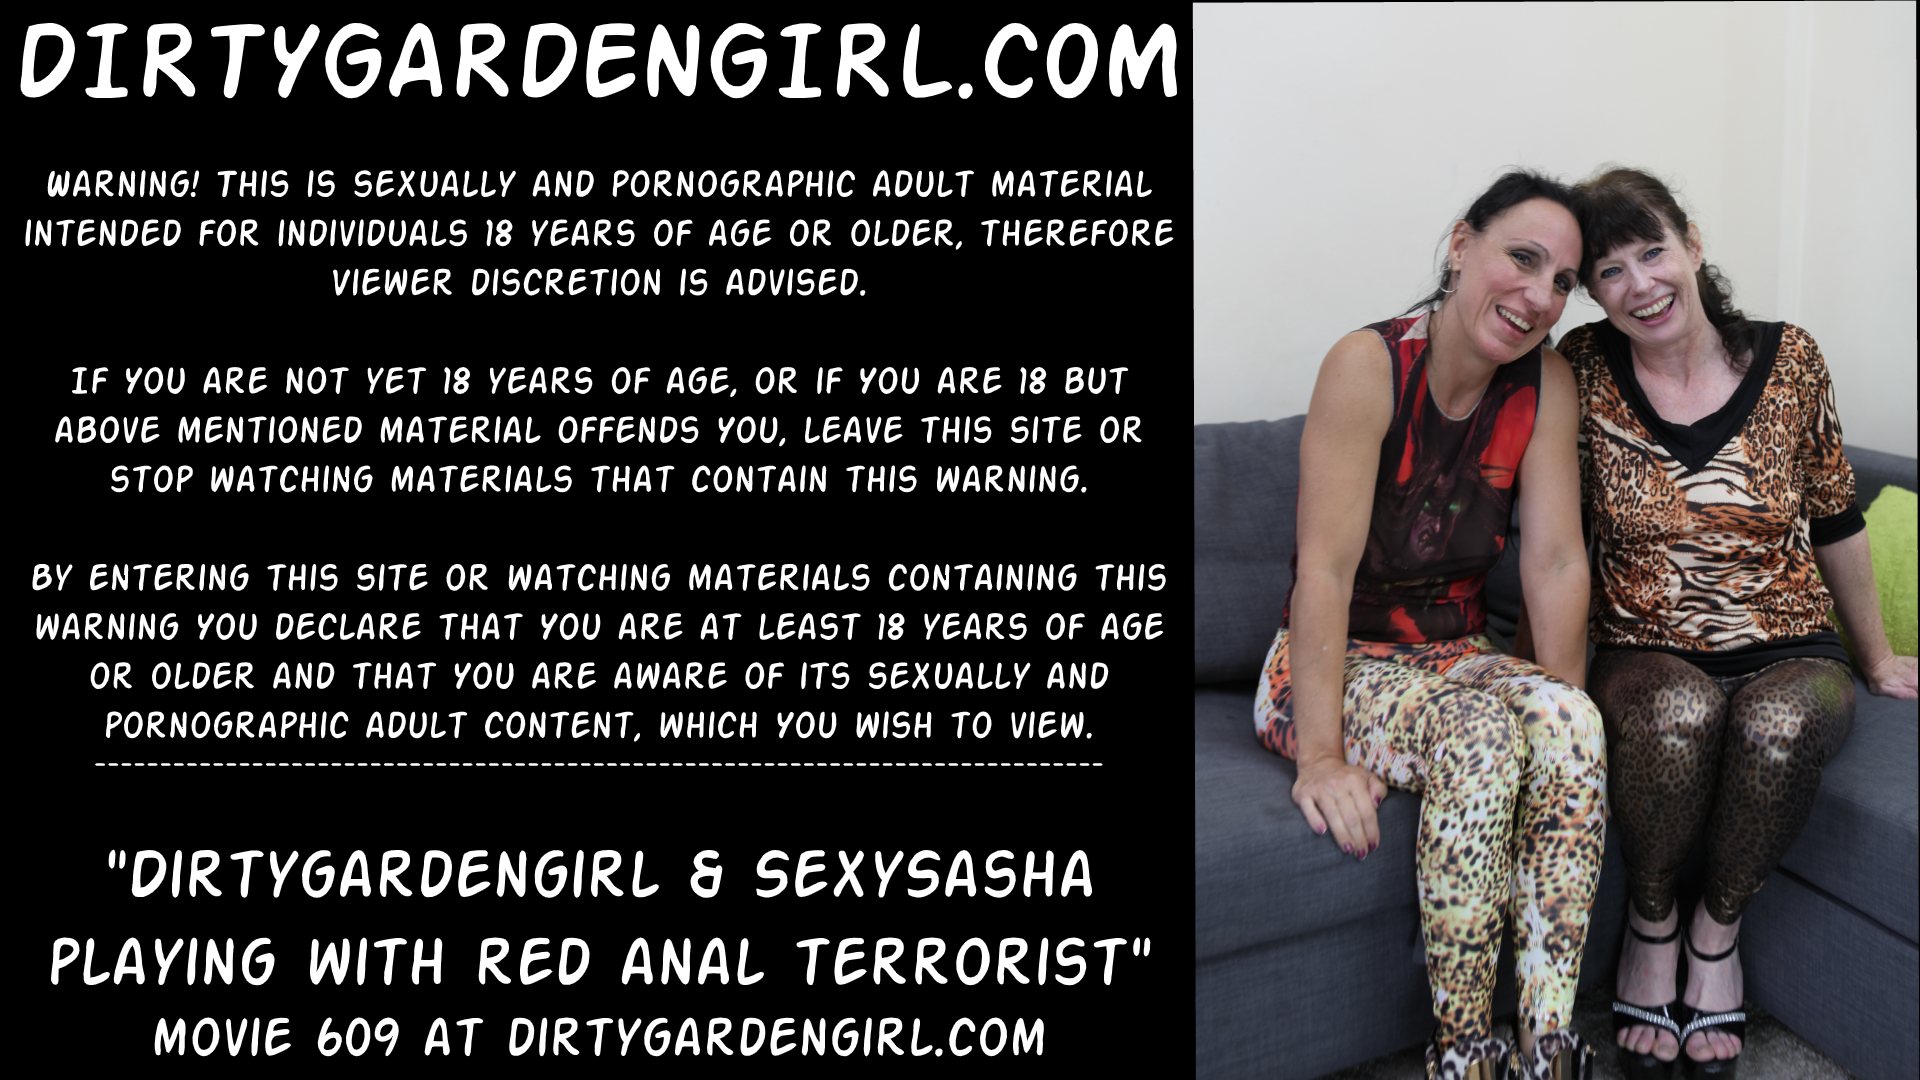 Dirtygardengirl & ... playing with red anal terrorist and prolapse